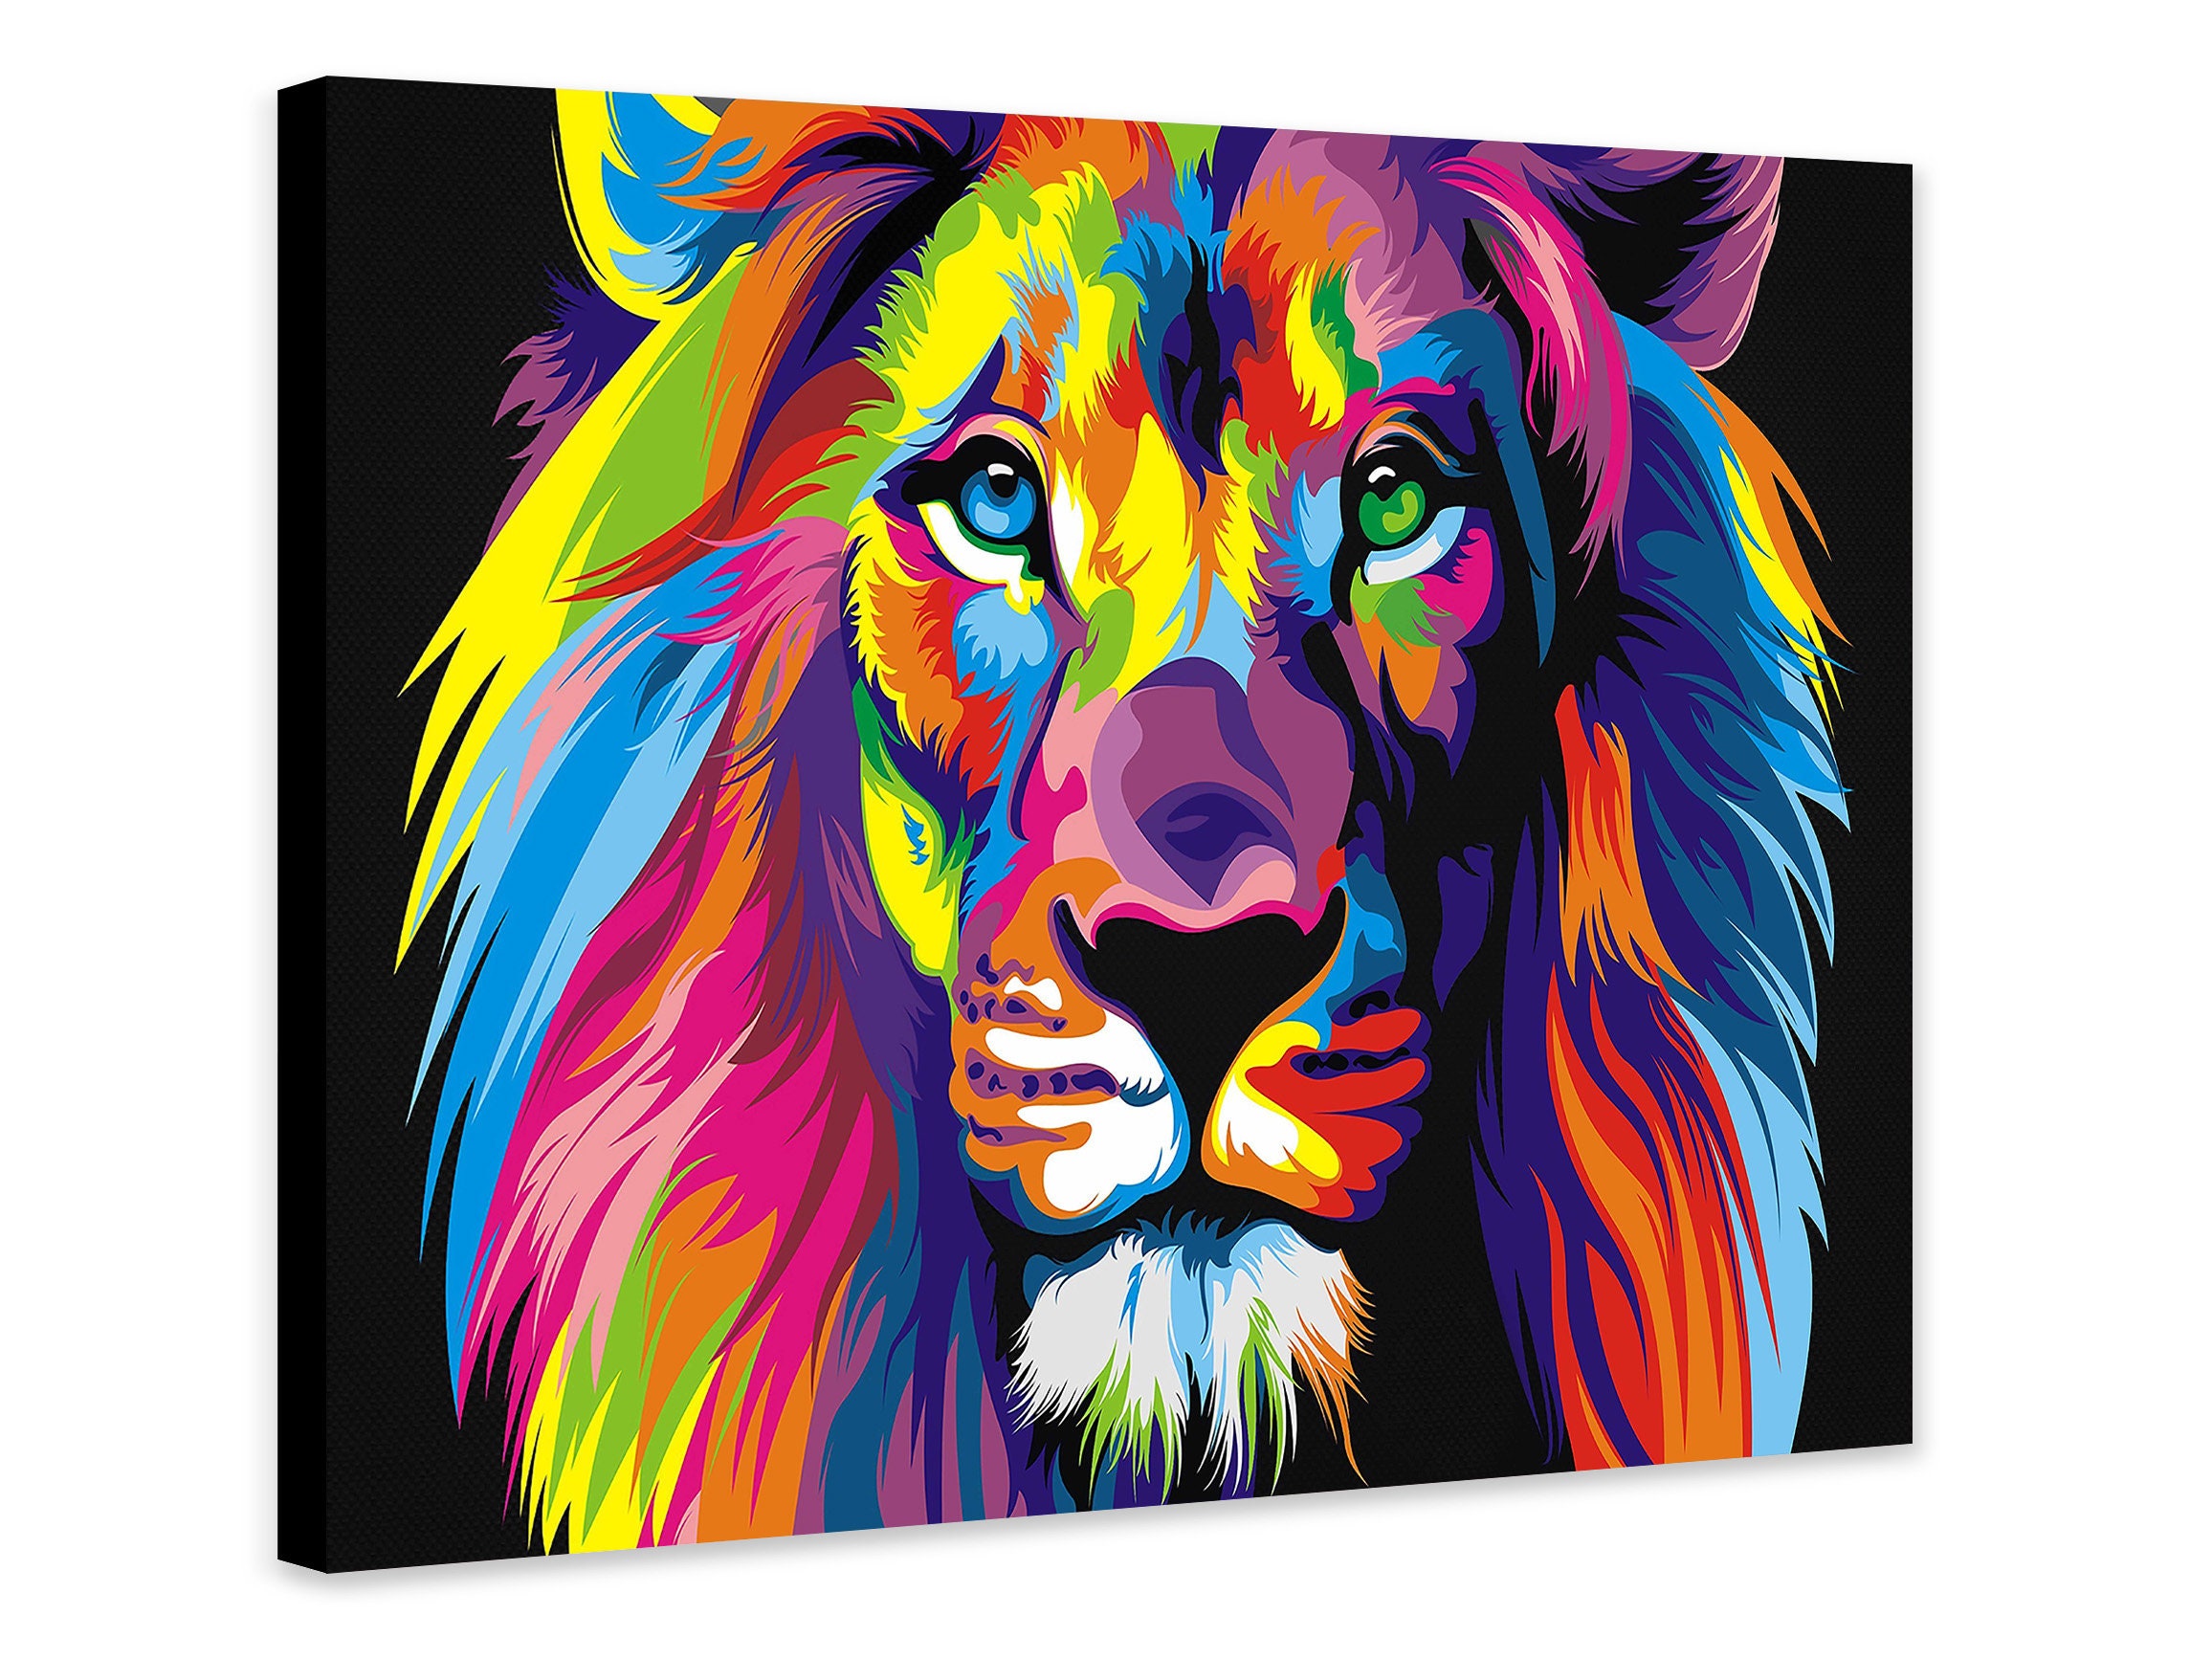 LION ANIMALS ABSTRACT MODERN DESIGN CANVAS WALL ART PICTURE LARGE AB18 X MATAGA 